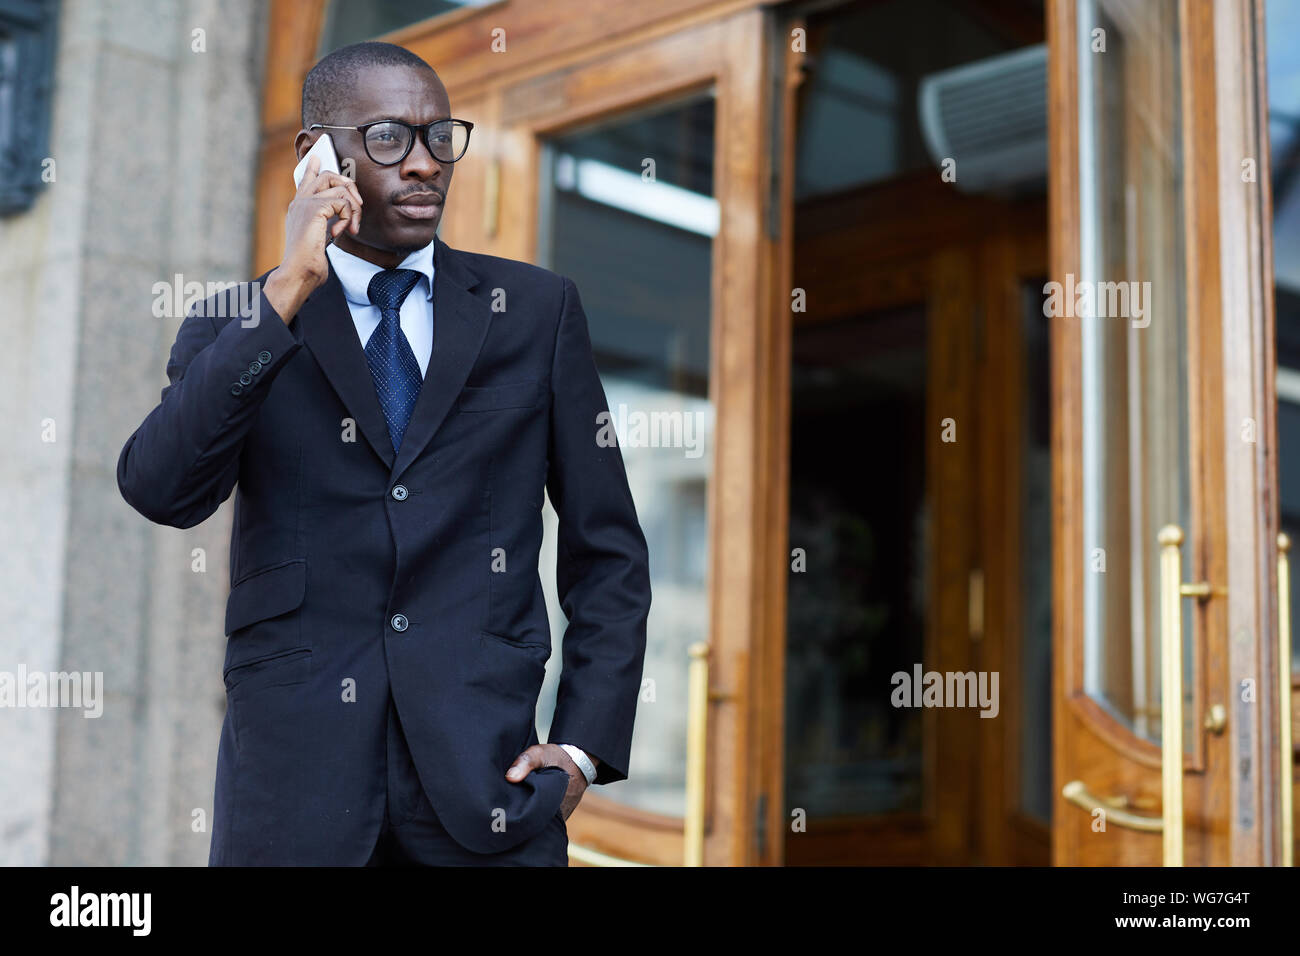 Waist up portrait of stylish African-American man wearing suit speaking by smartphone while leaving work, copy space Stock Photo